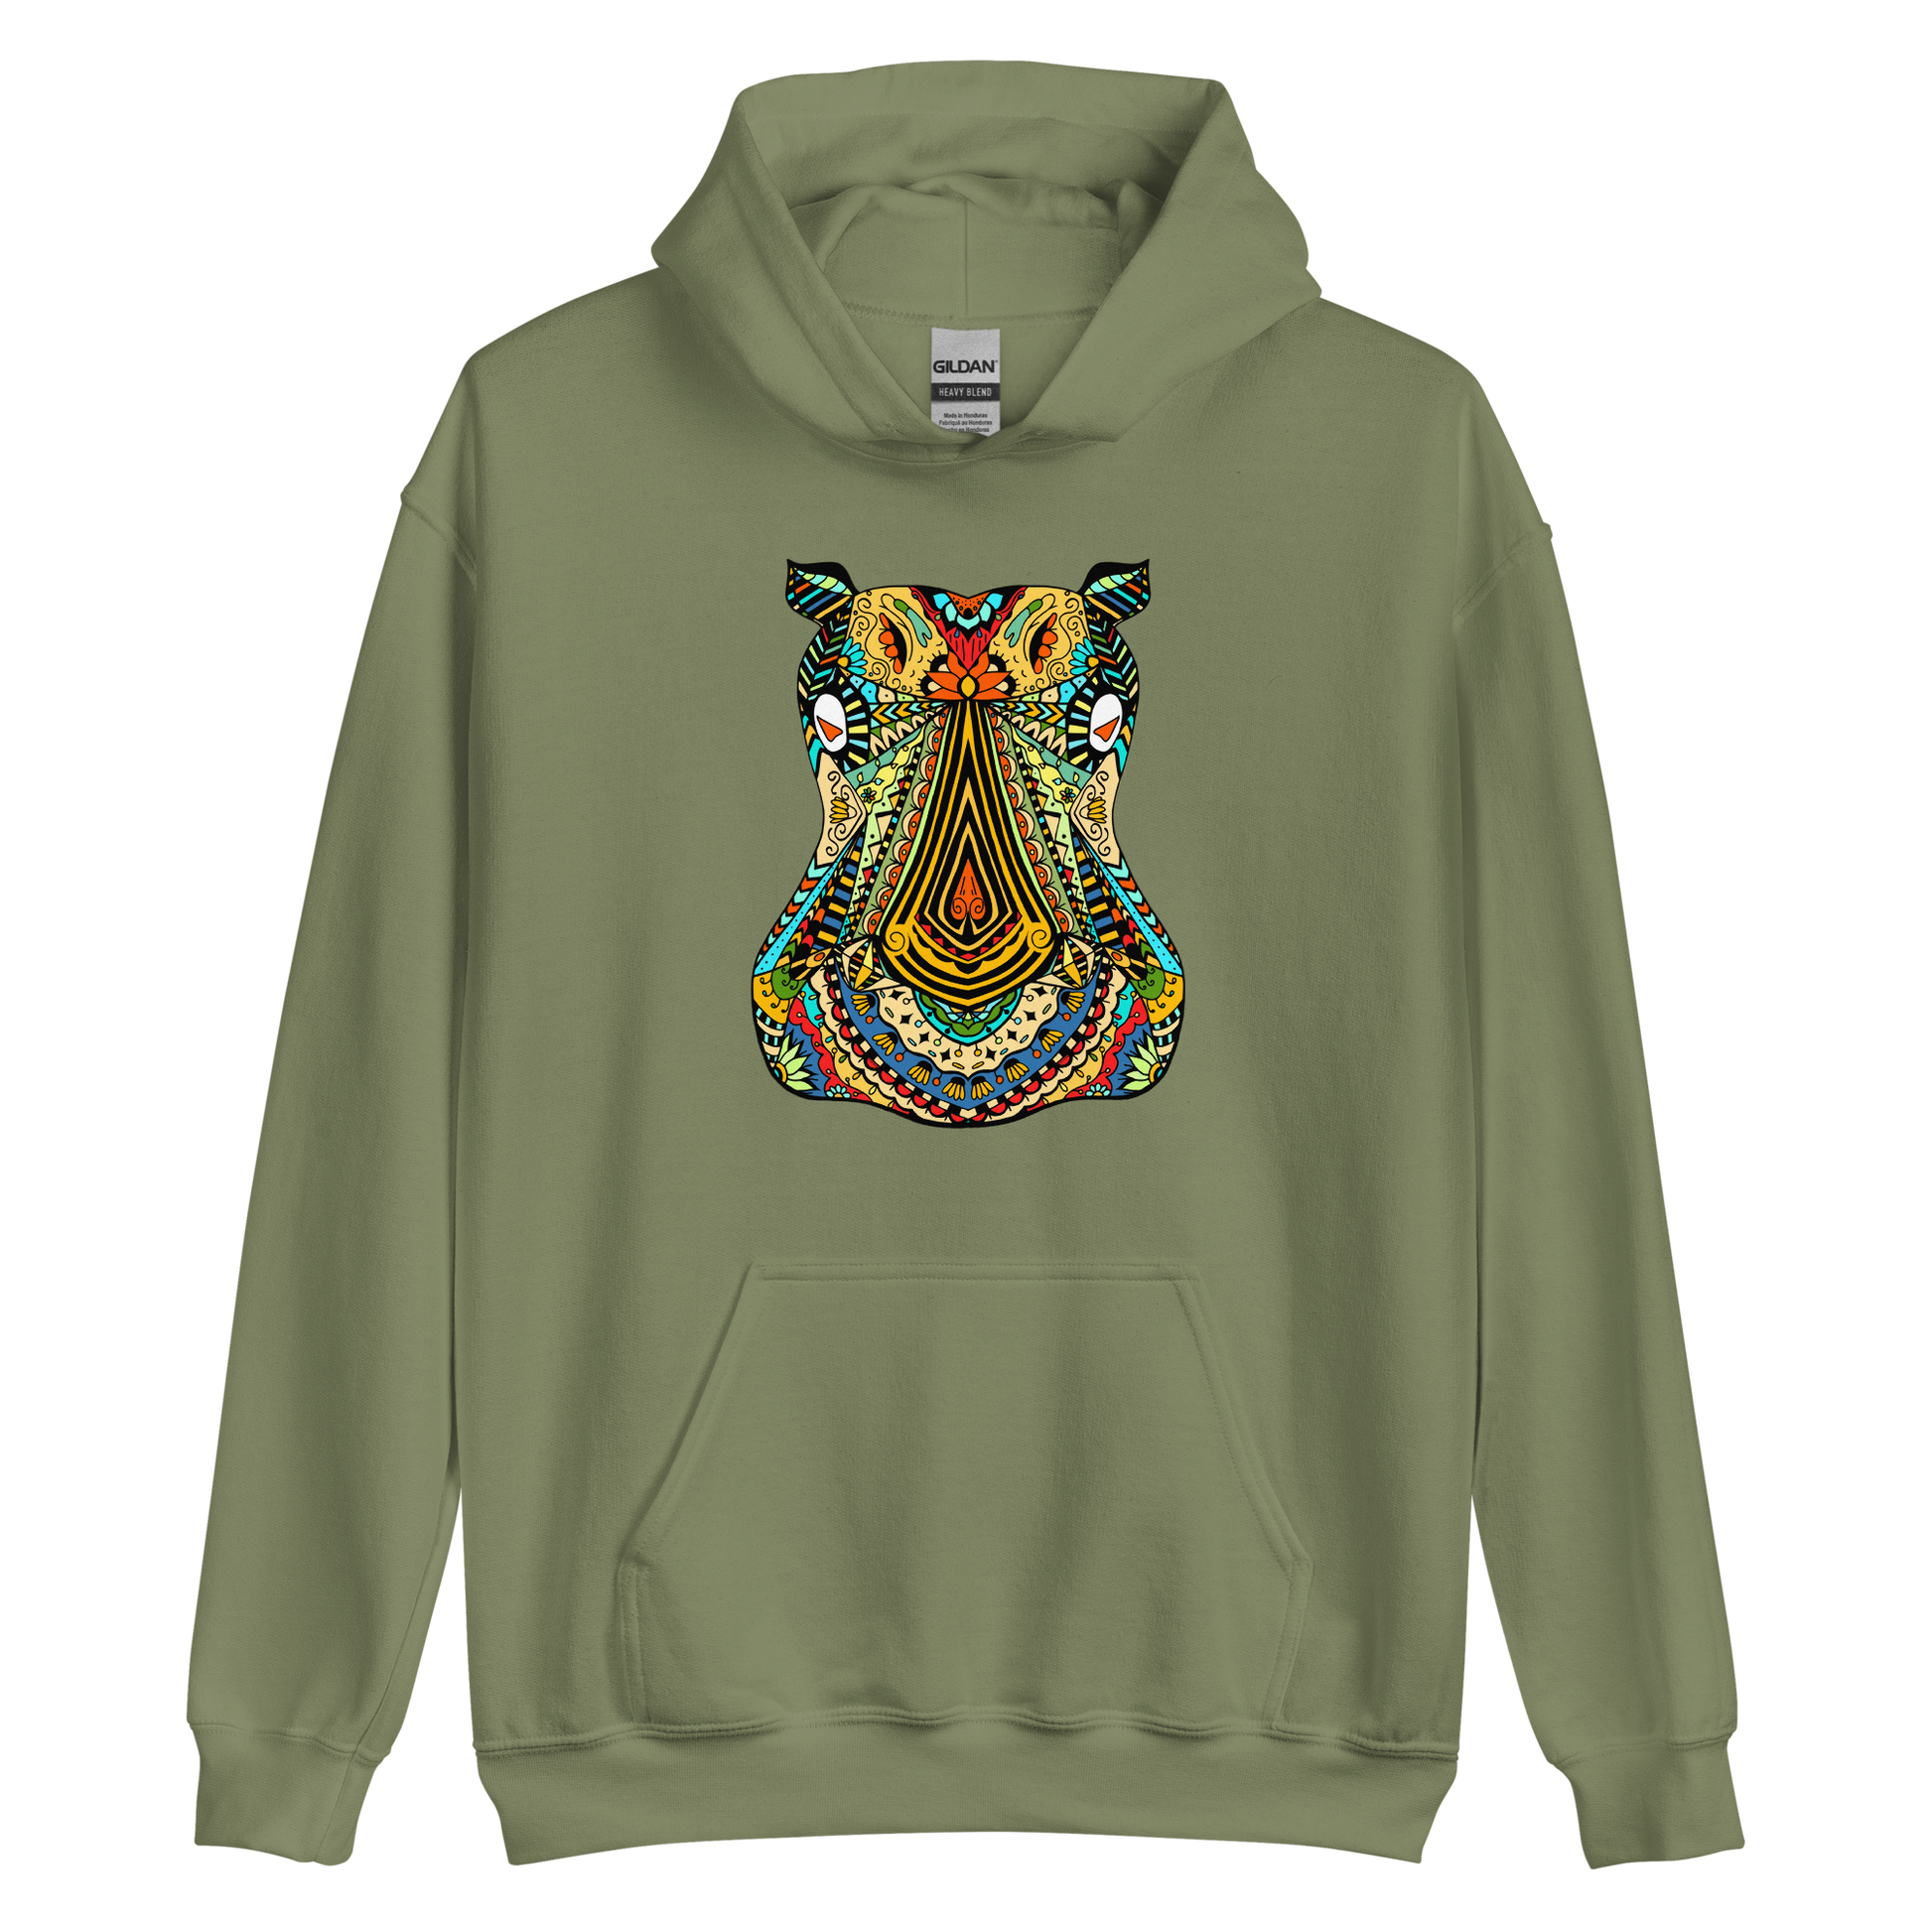 Military Green Hippo Hoodie featuring a captivating Zentangle Hippo graphic on the chest - Cool Graphic Hippo Hoodies - Boozy Fox